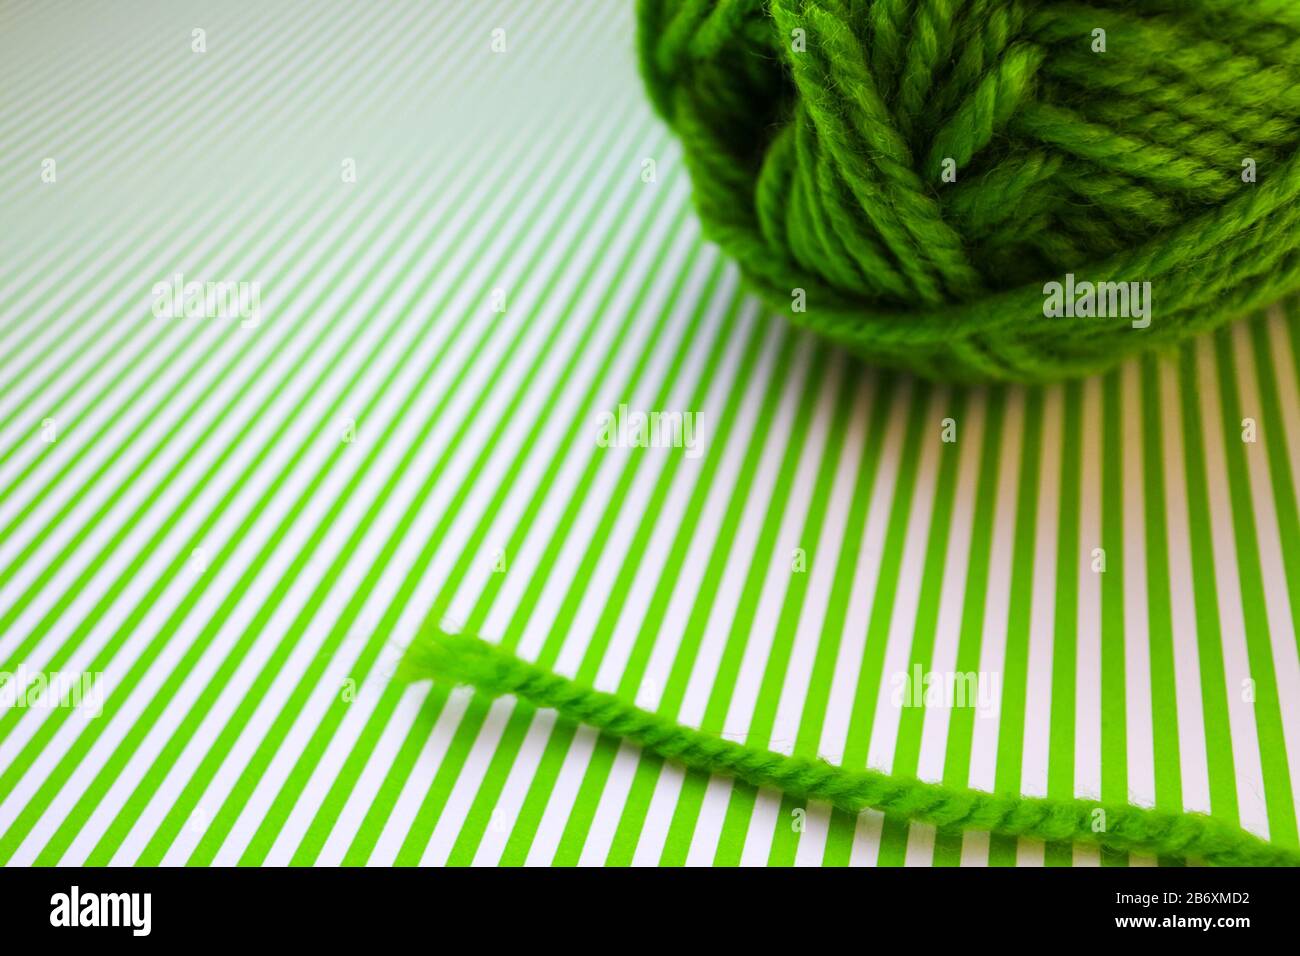 Green yarn ball on a green striped background. Stock Photo